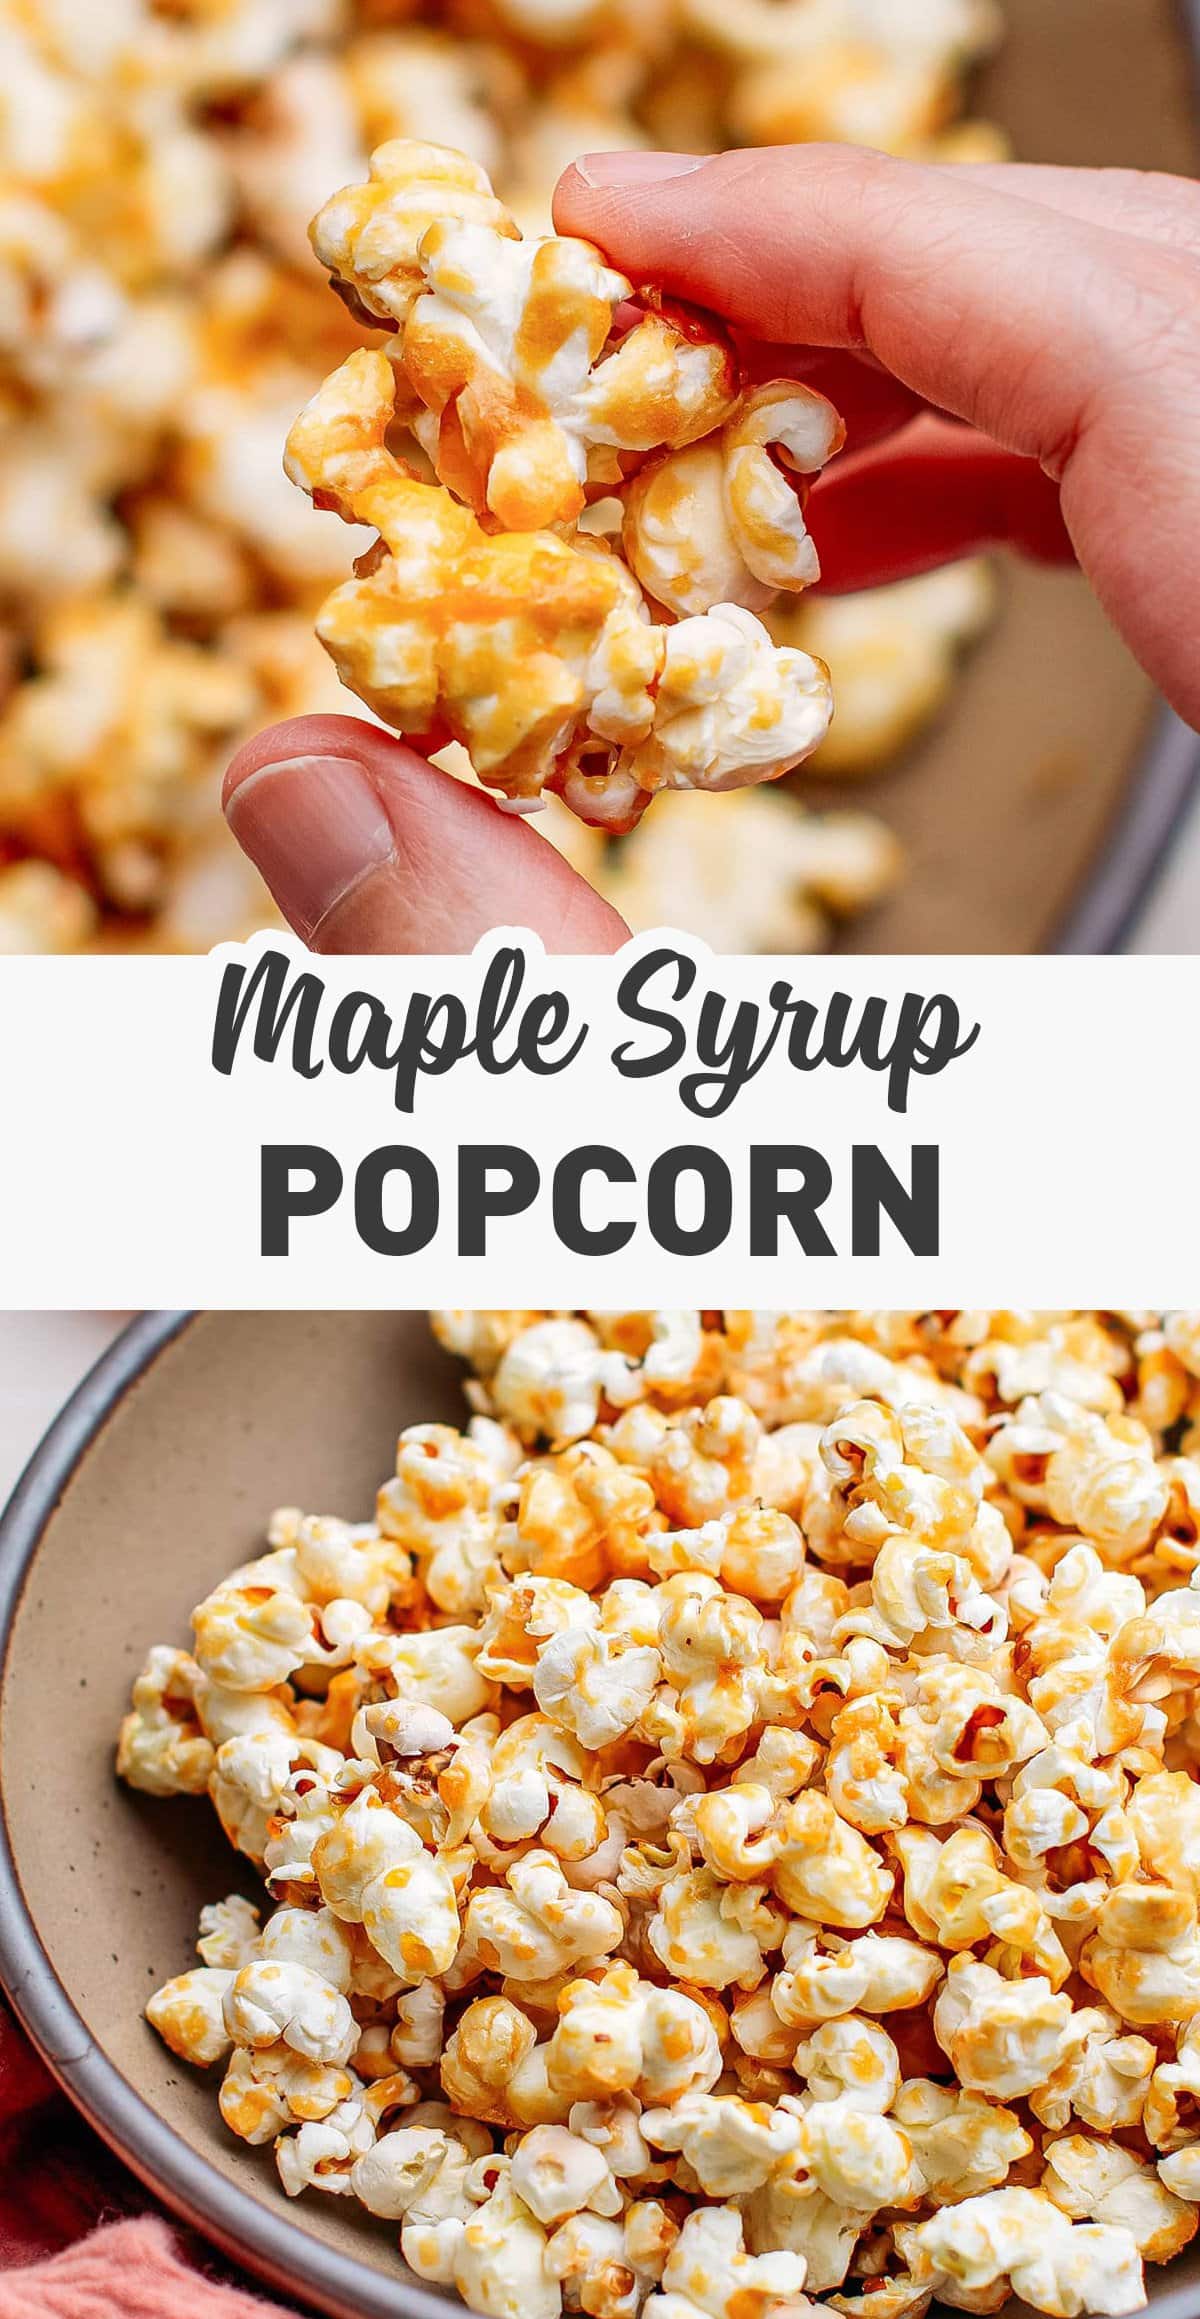 Introducing maple syrup popcorn! The same sweet and crispy popcorn that you already love, minus the refined sugar! This 4-ingredient popcorn has a delicious caramelized flavor, a touch of saltiness, and is incredibly addictive!